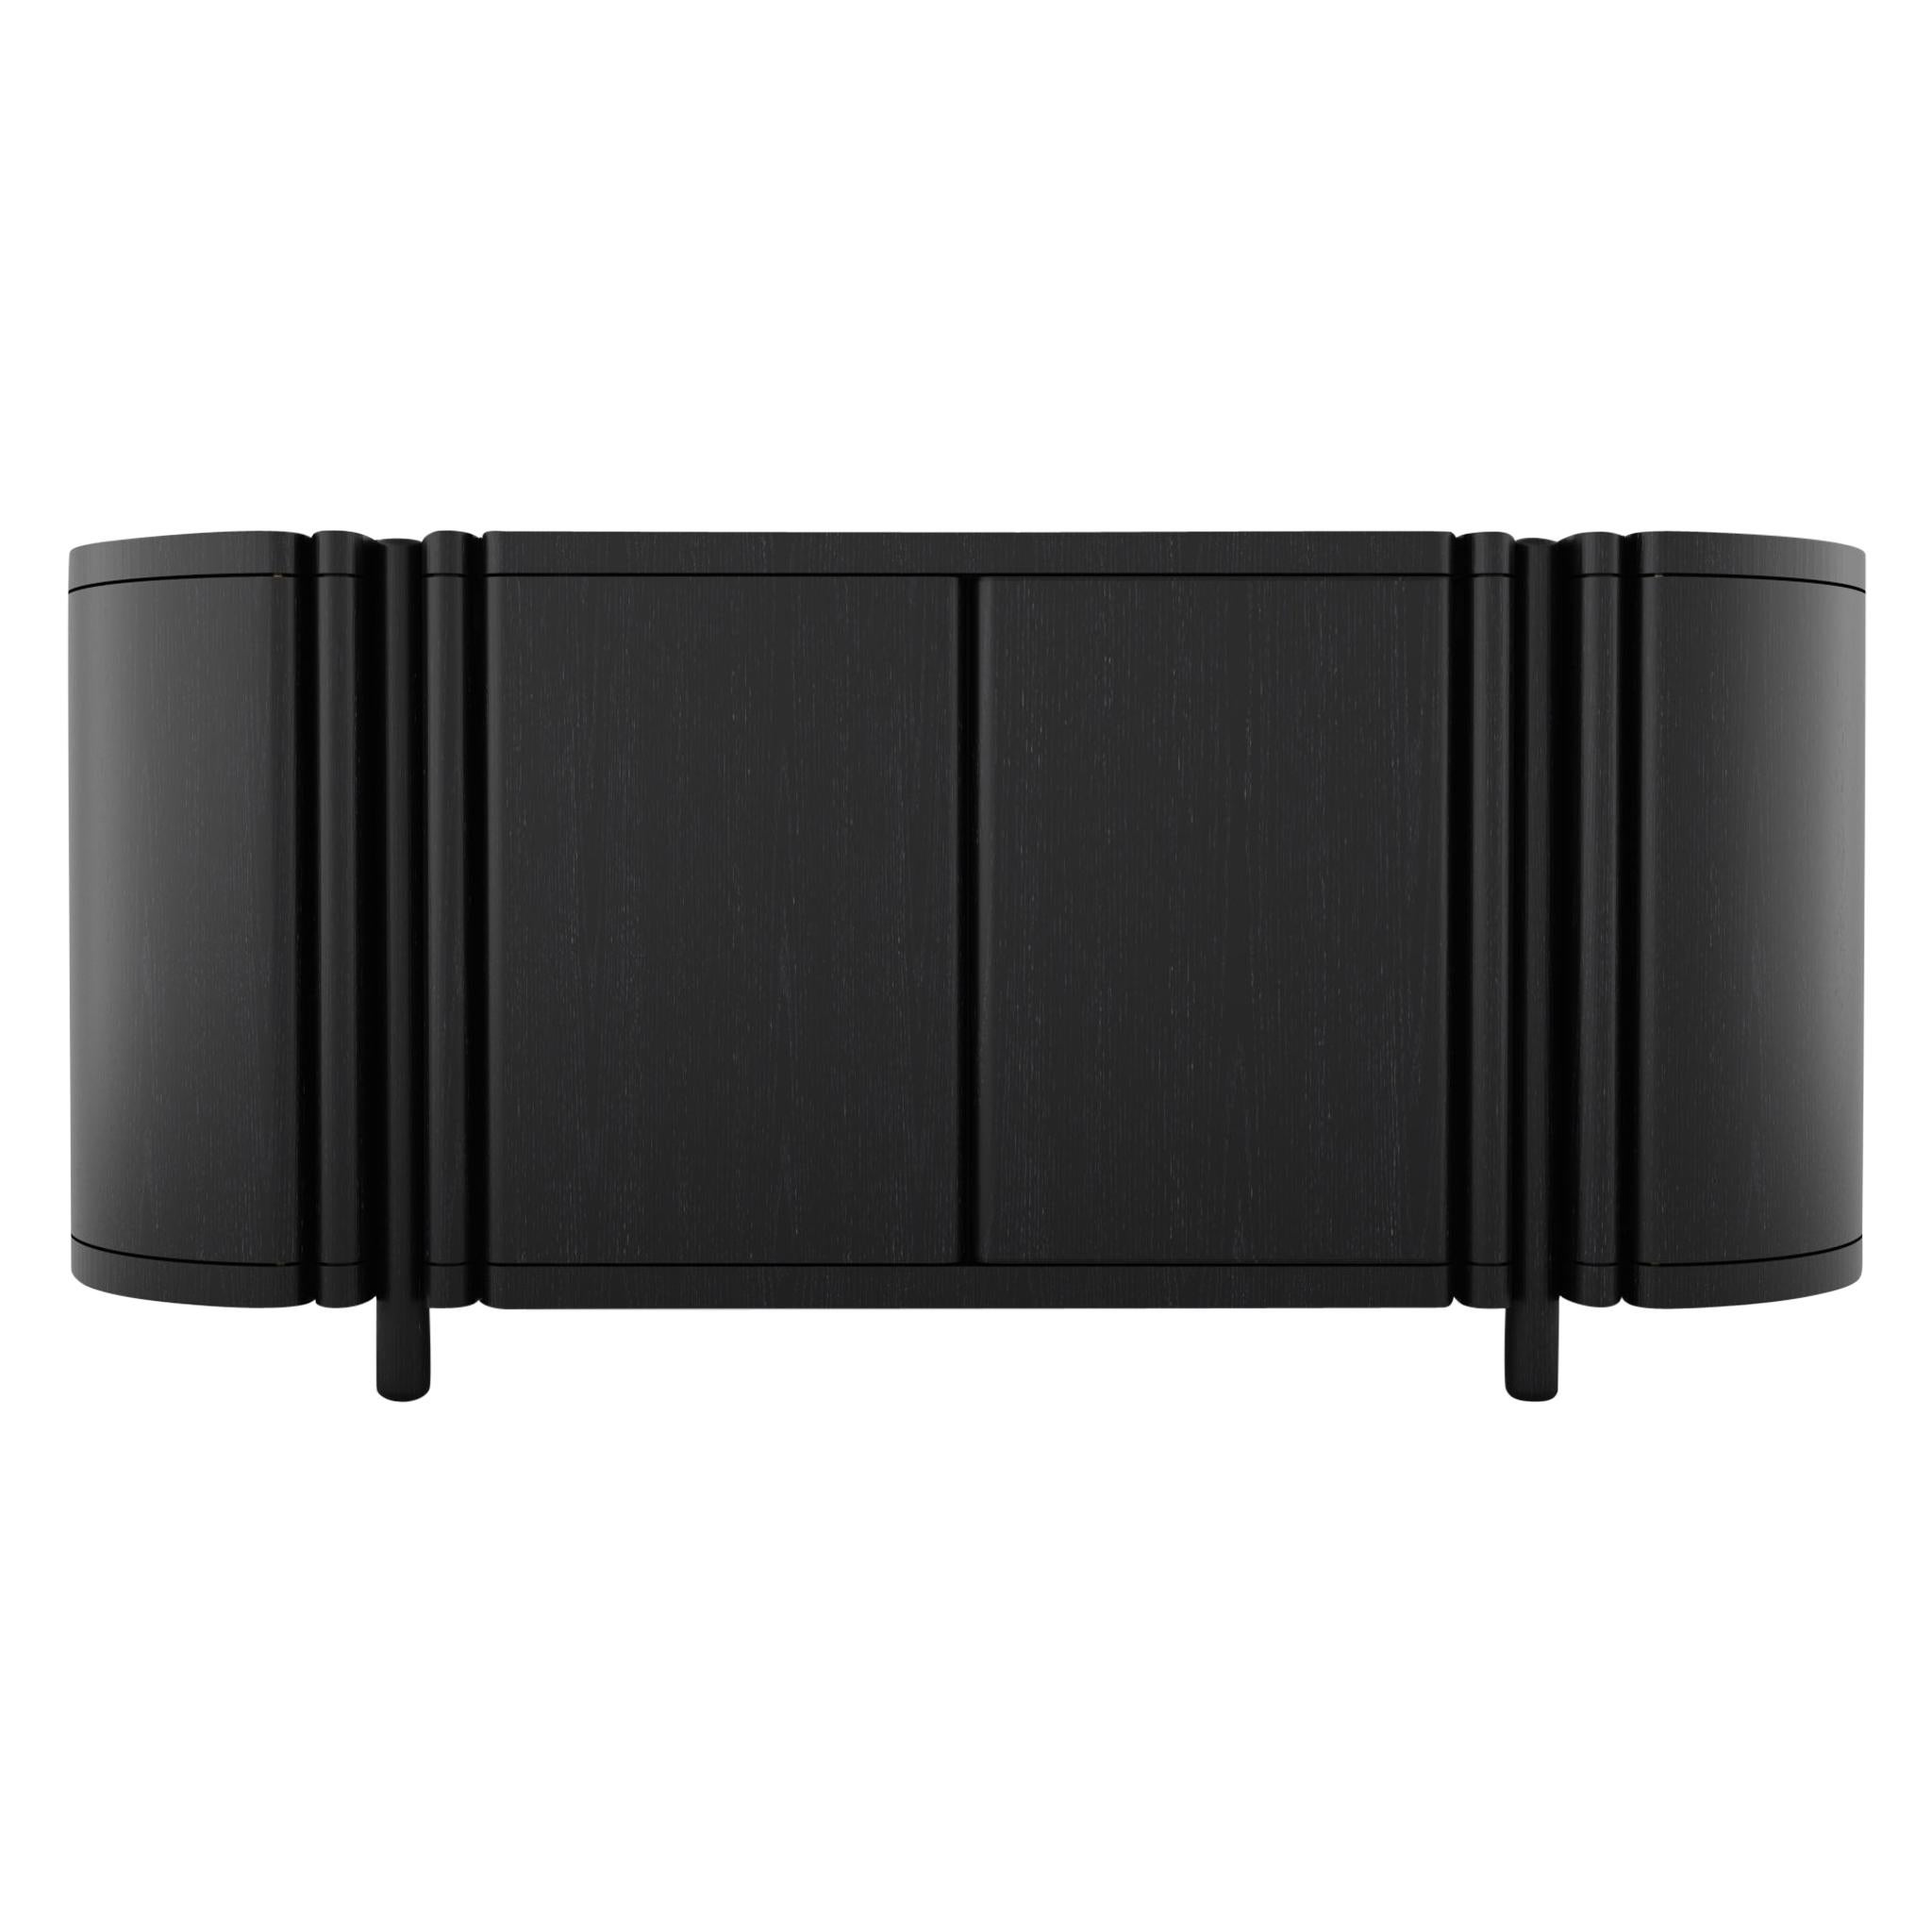 Column Console by Black Table Studio, Black, REP by Tuleste Factory For Sale